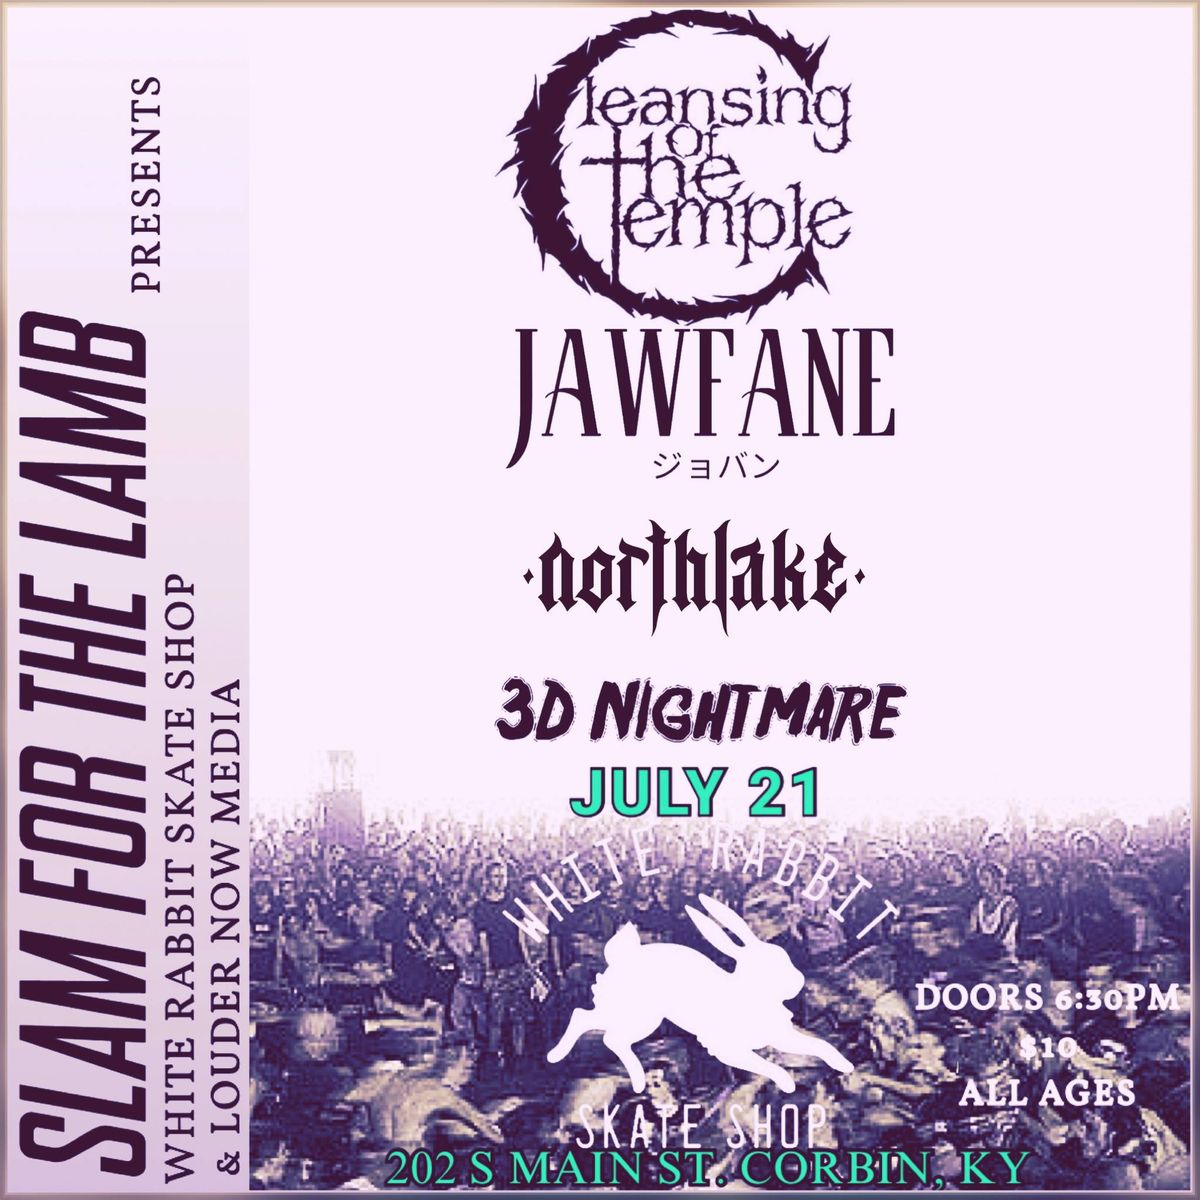 CLEANSING OF THE TEMPLE, JAWFANE, NORTHLAKE & 3D NIGHTMARE @ WHITE RABBIT SKATE SHOP